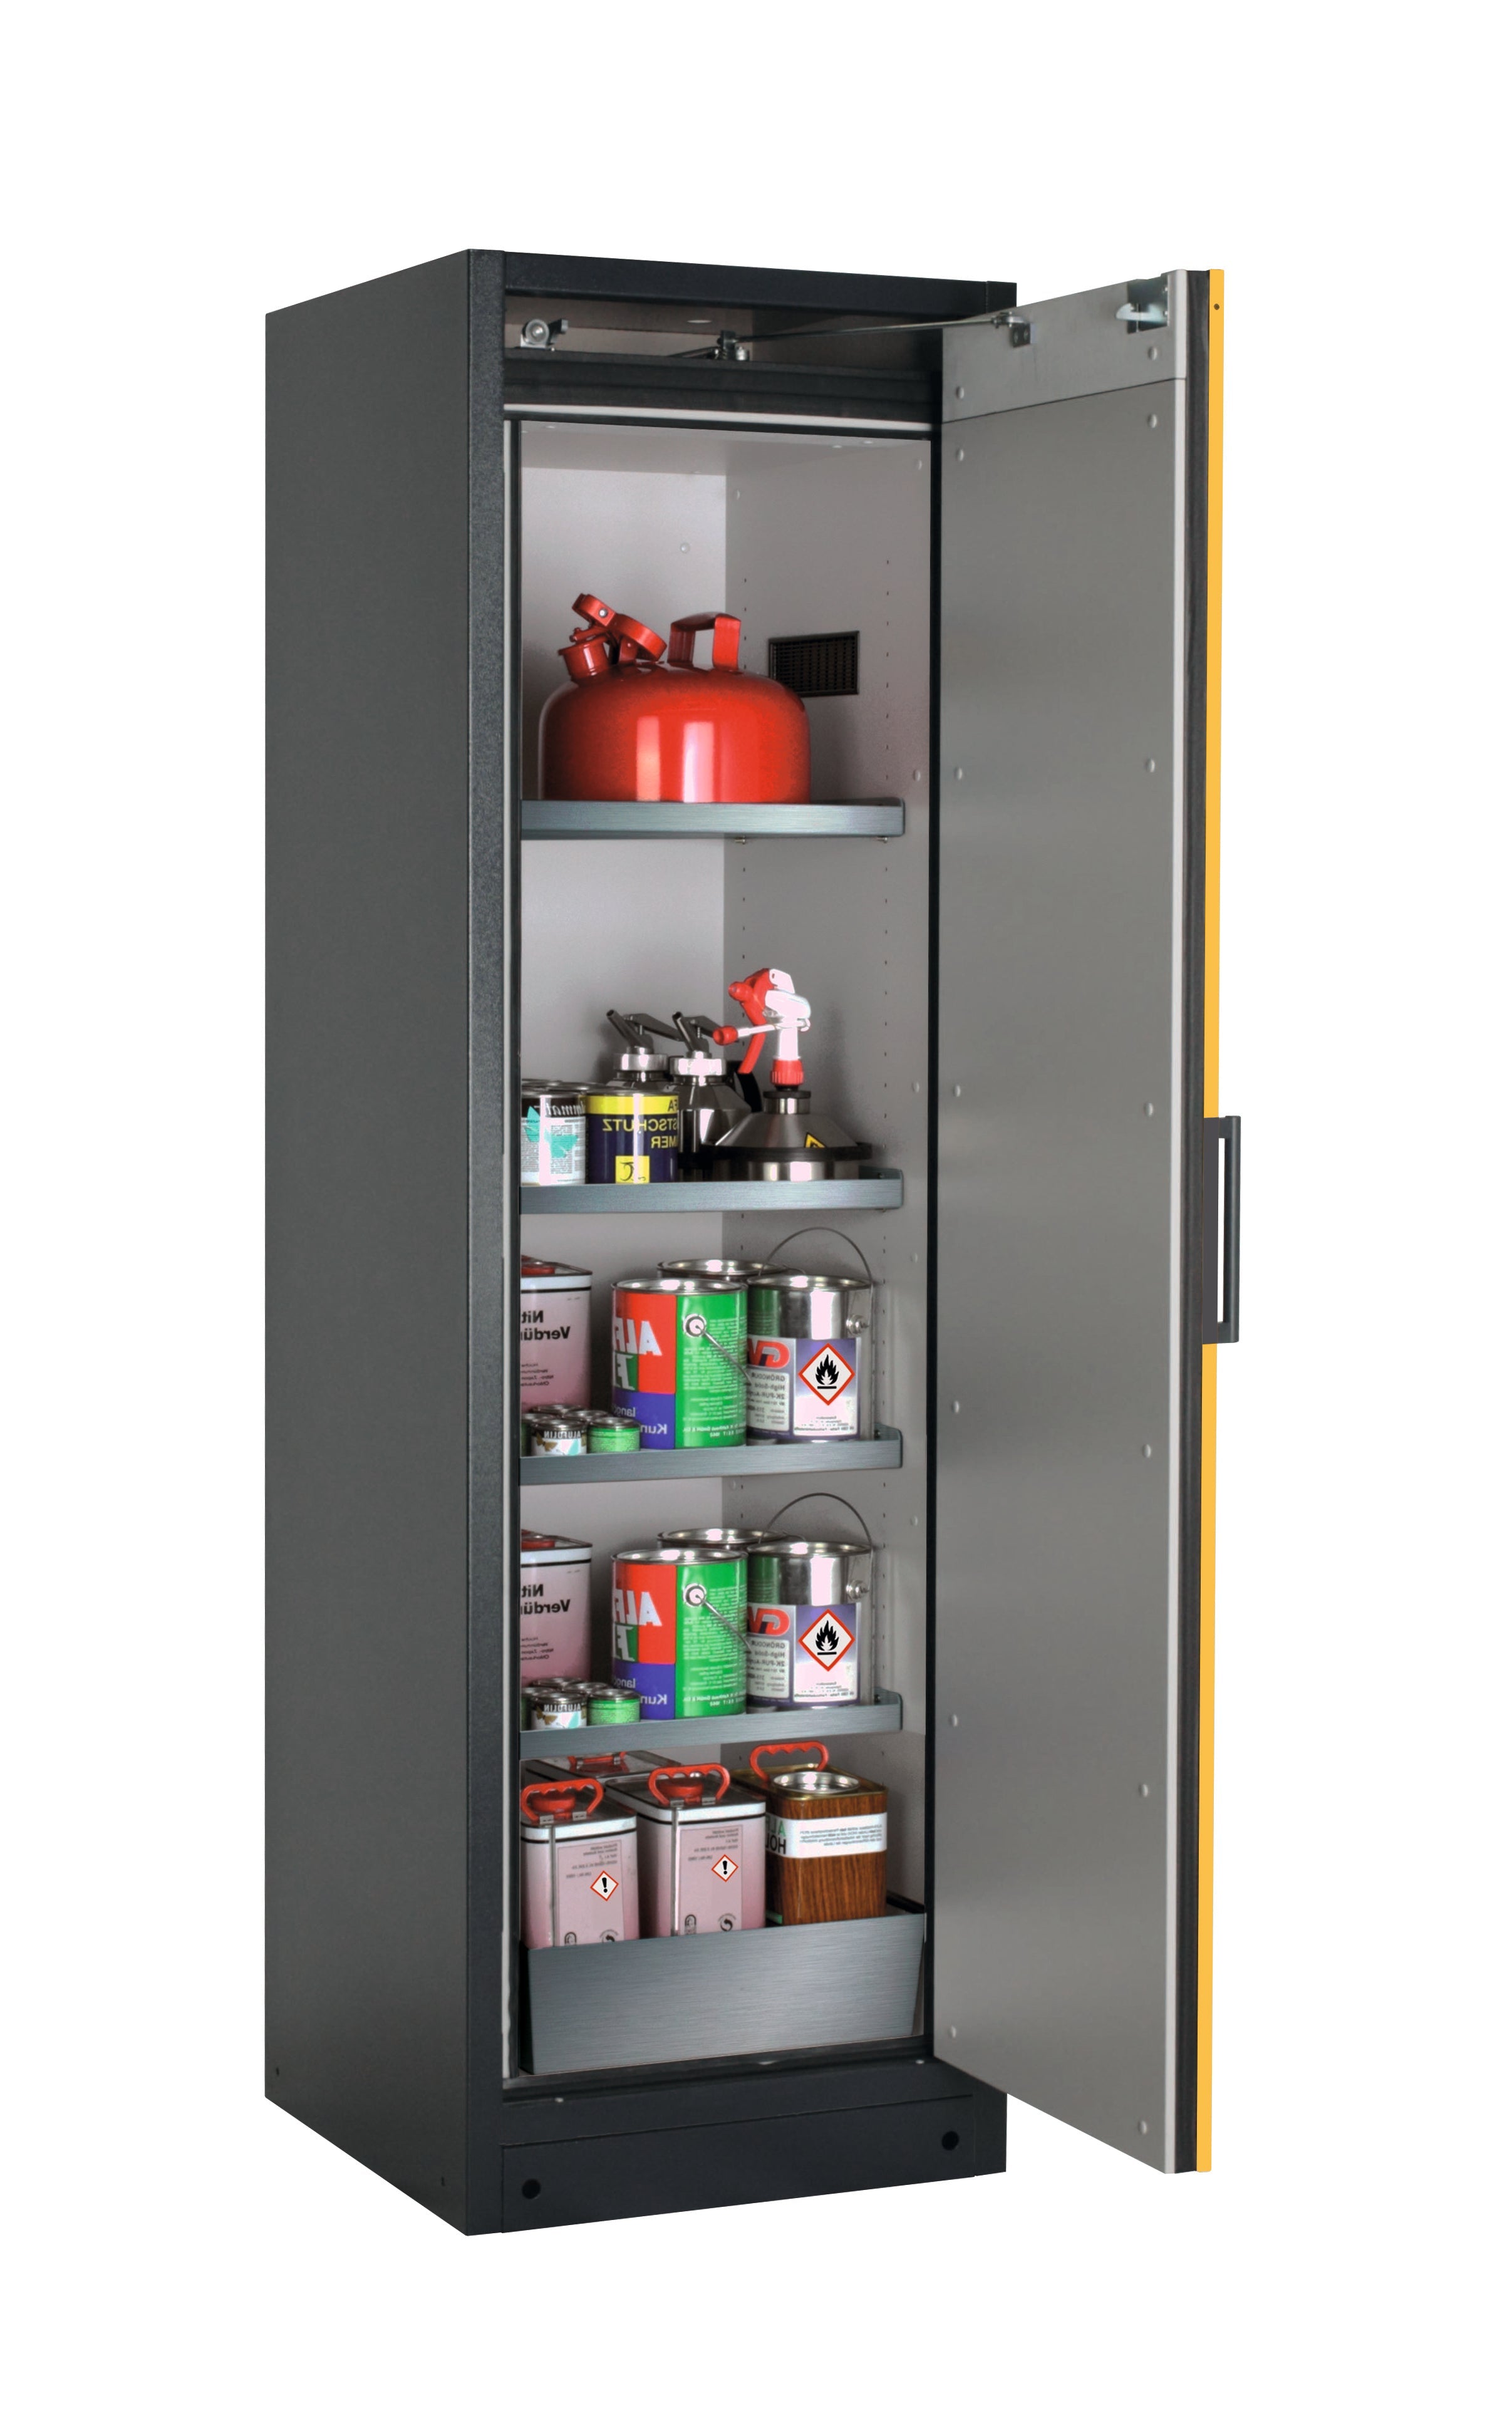 Type 90 safety storage cabinet Q-CLASSIC-90 model Q90.195.060.R in warning yellow RAL 1004 with 4x shelf standard (stainless steel 1.4301),